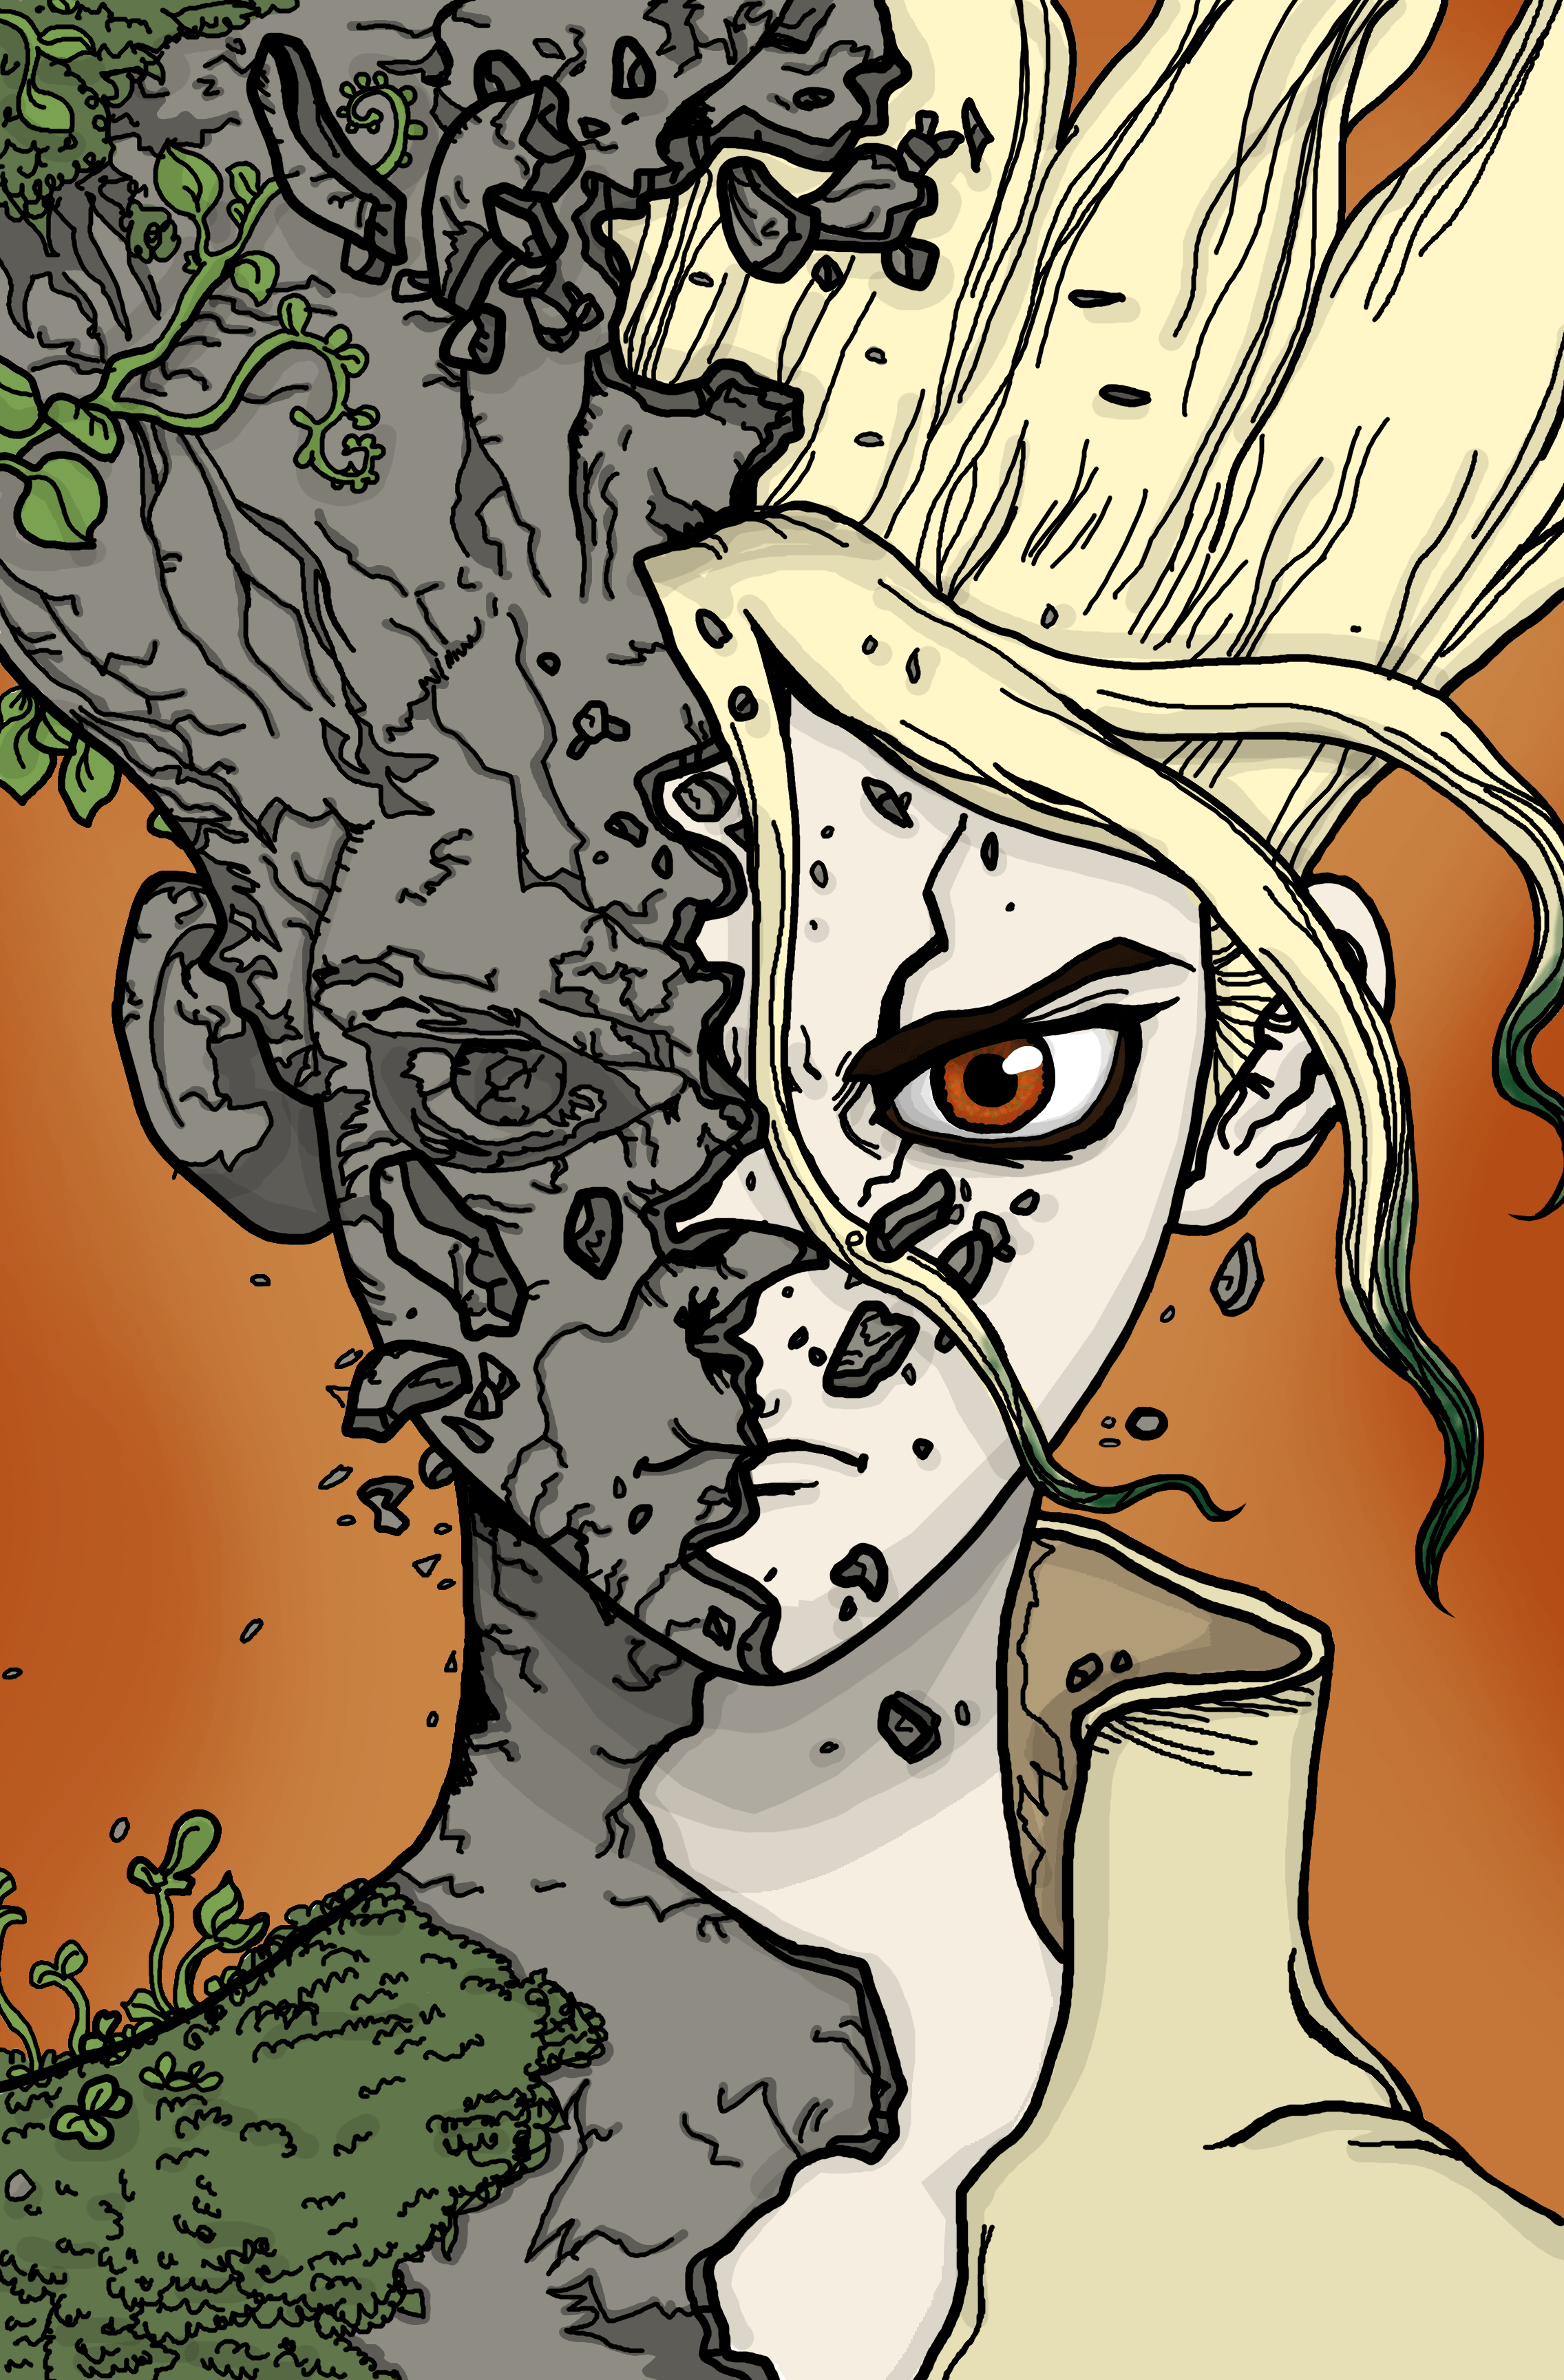 I just read Dr Stone; then I drew Senku to console myself